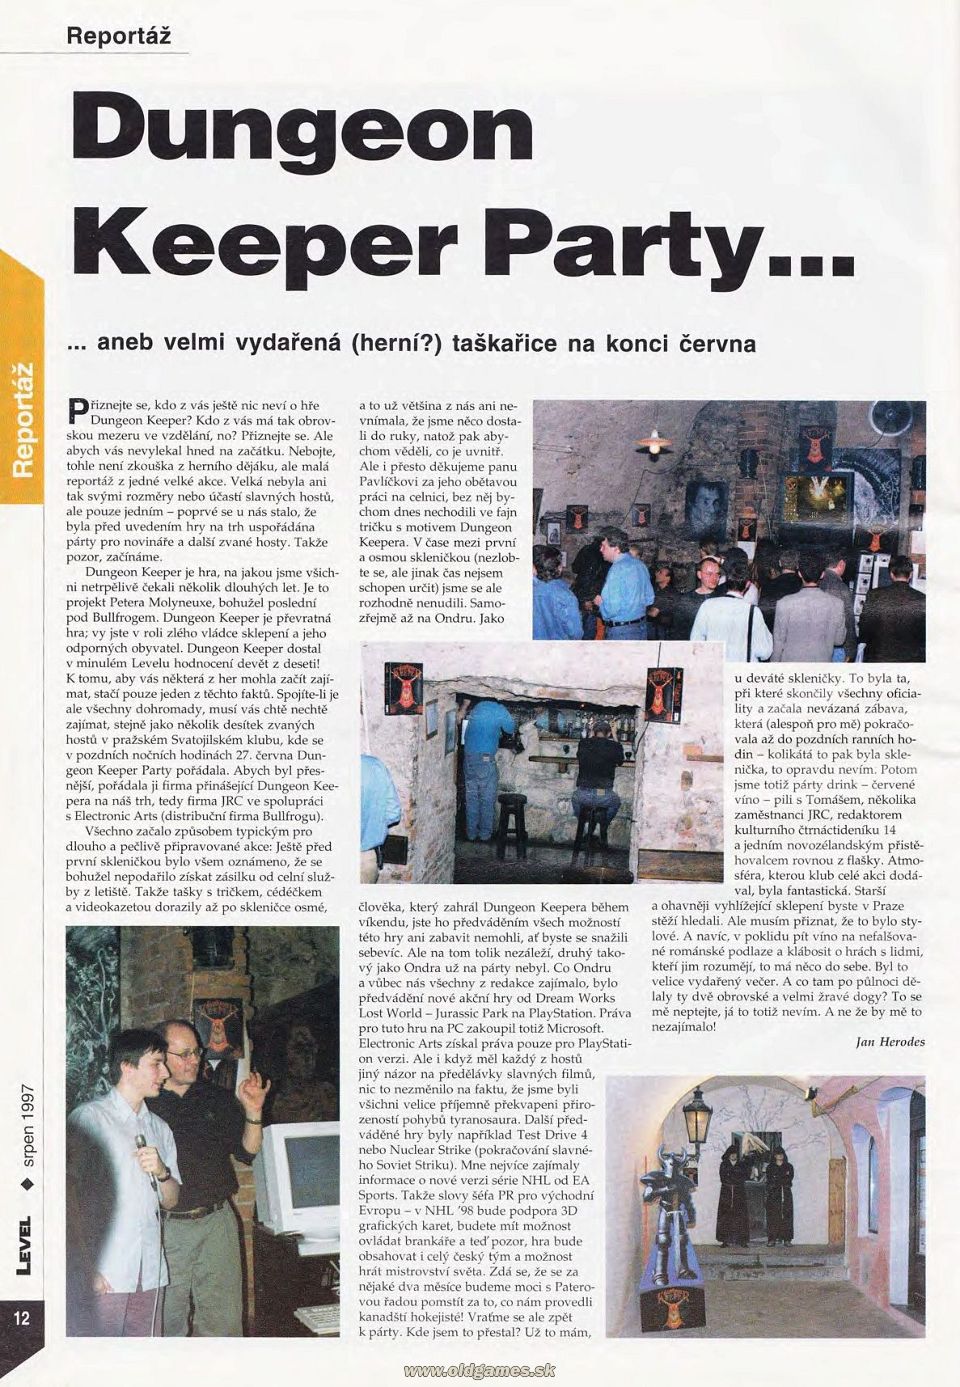 Reportáž: Dungeon Keeper Party